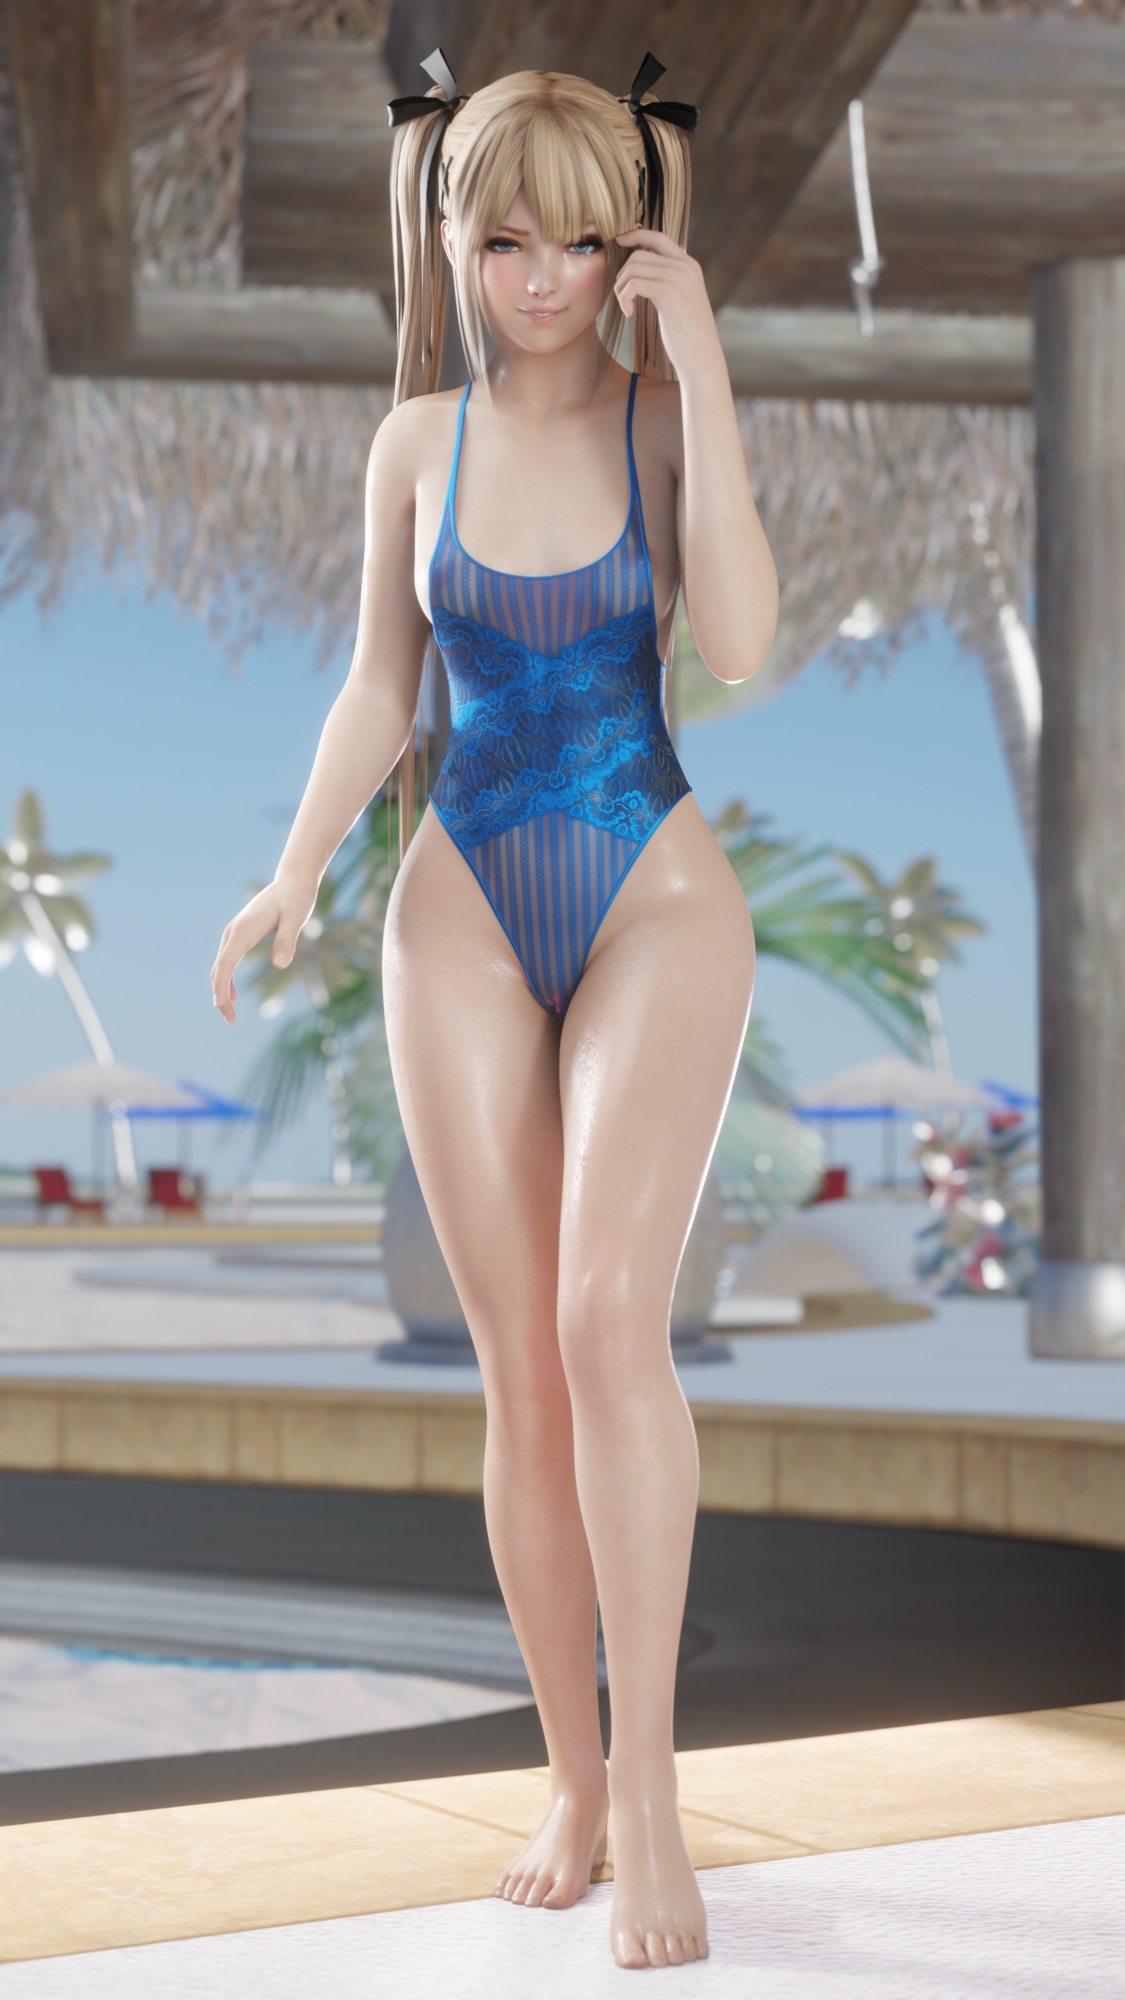 Marie Rose at the pool. Marie Rose Dead Or Alive Looking At Viewer Sexy Posing 4